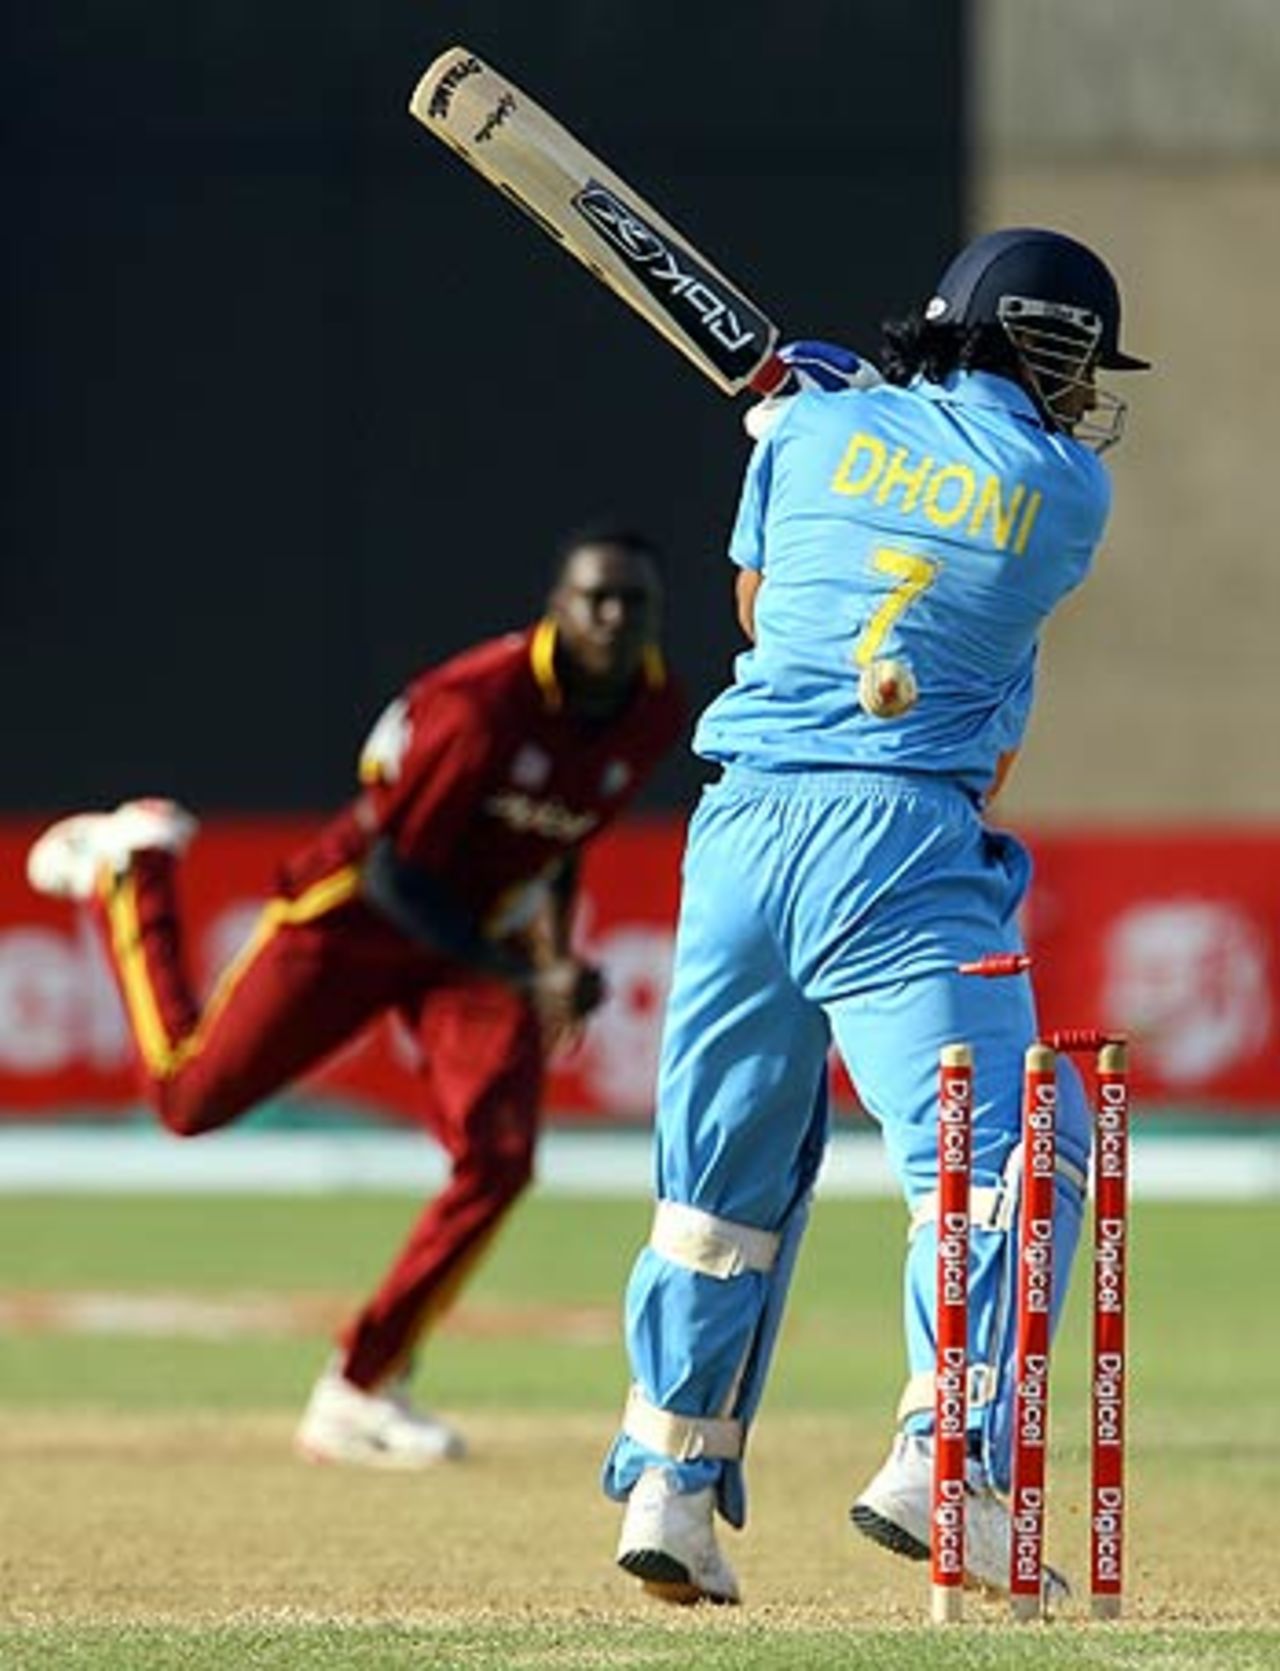 Mahendra Singh Dhoni chops on as India make a meal of their chase at Kingston, West Indies v India, 2nd ODI, Kingston, May 20, 2006